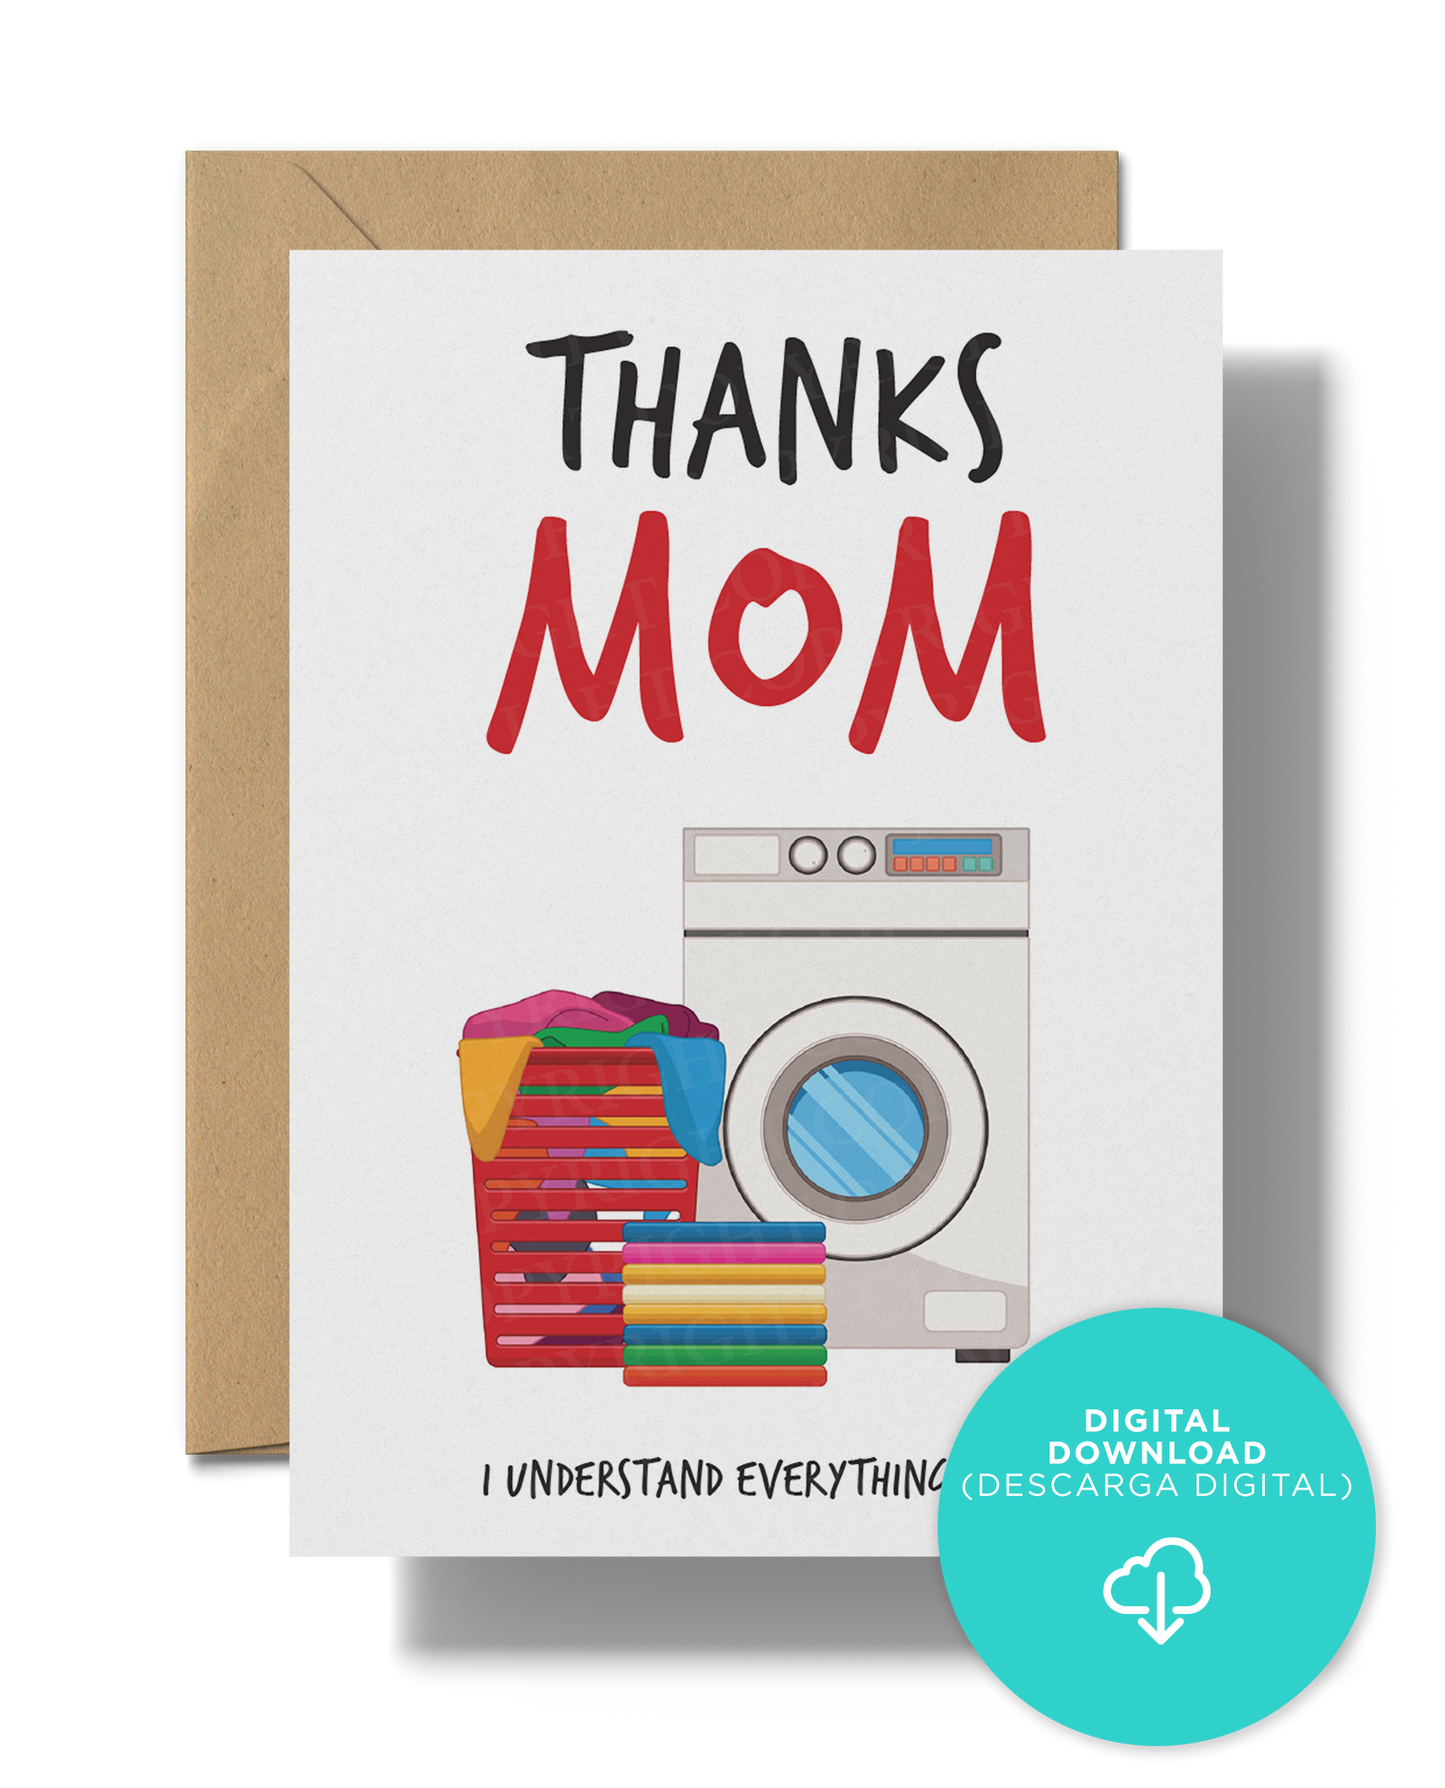 Thanks mom, I understand everything now | Instant Digital Download PDF